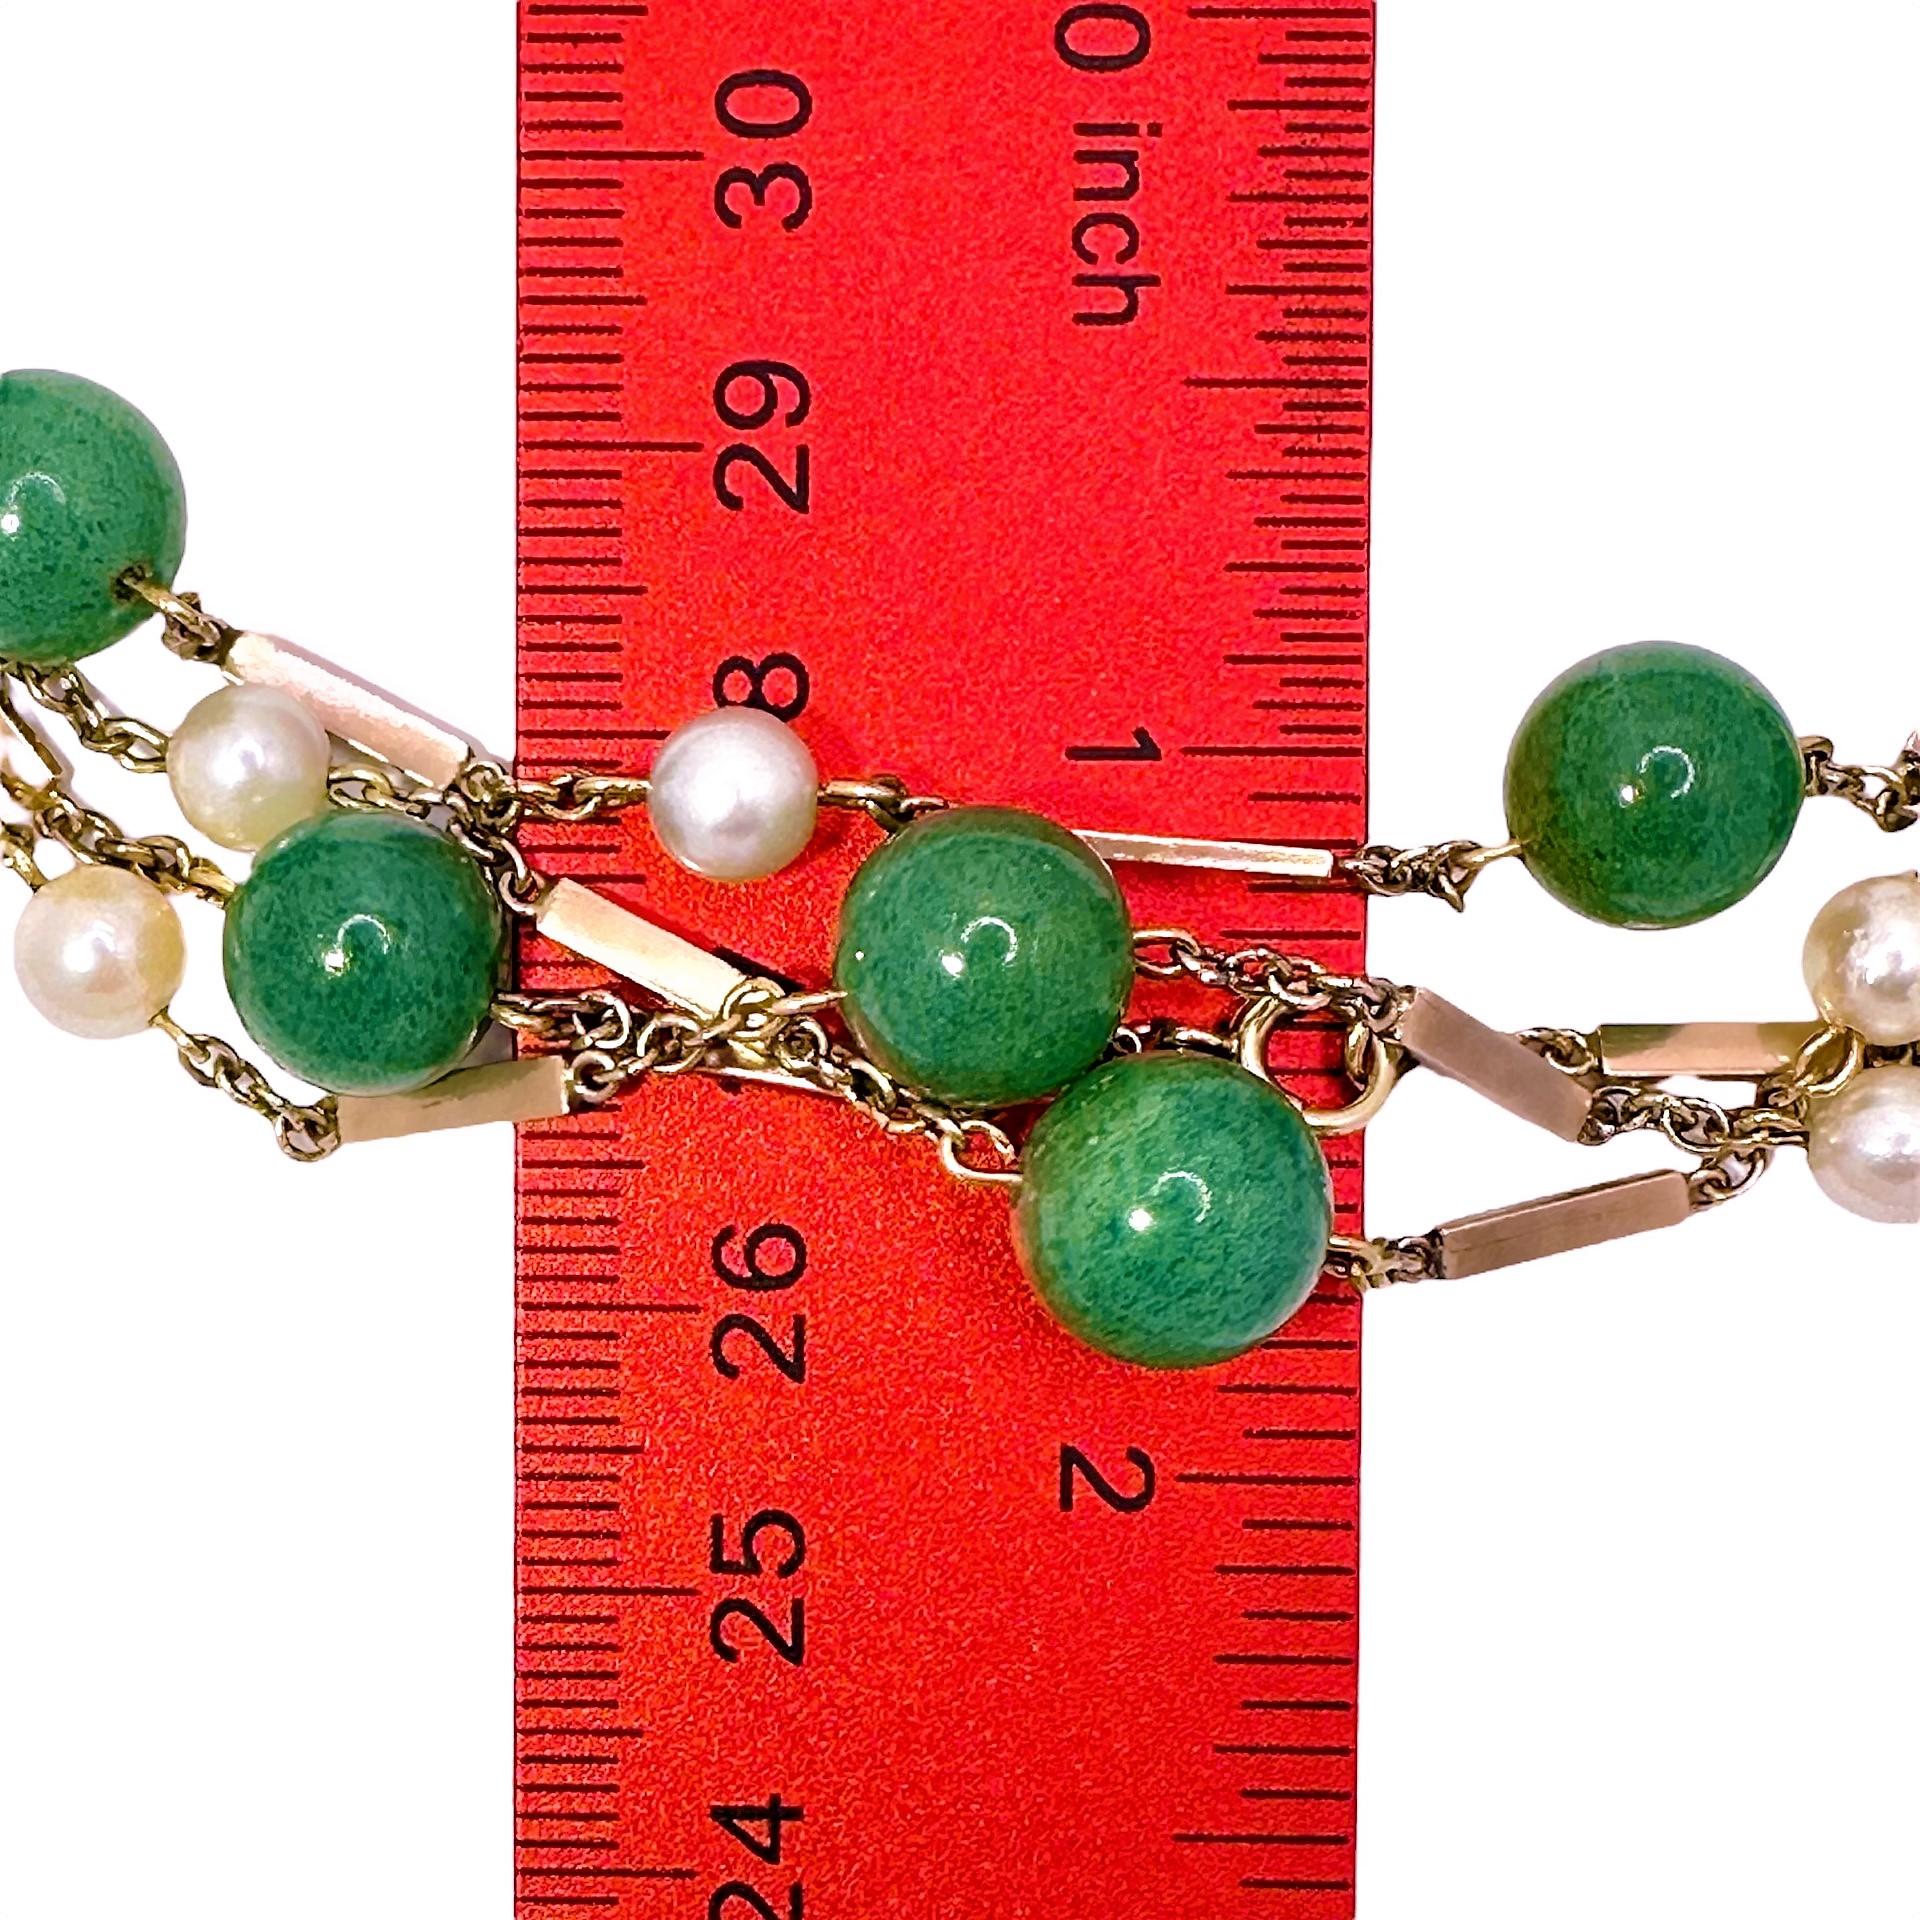 14k Yellow Gold, Aventurine Bead and Cultured Pearl Chain In Good Condition For Sale In Palm Beach, FL